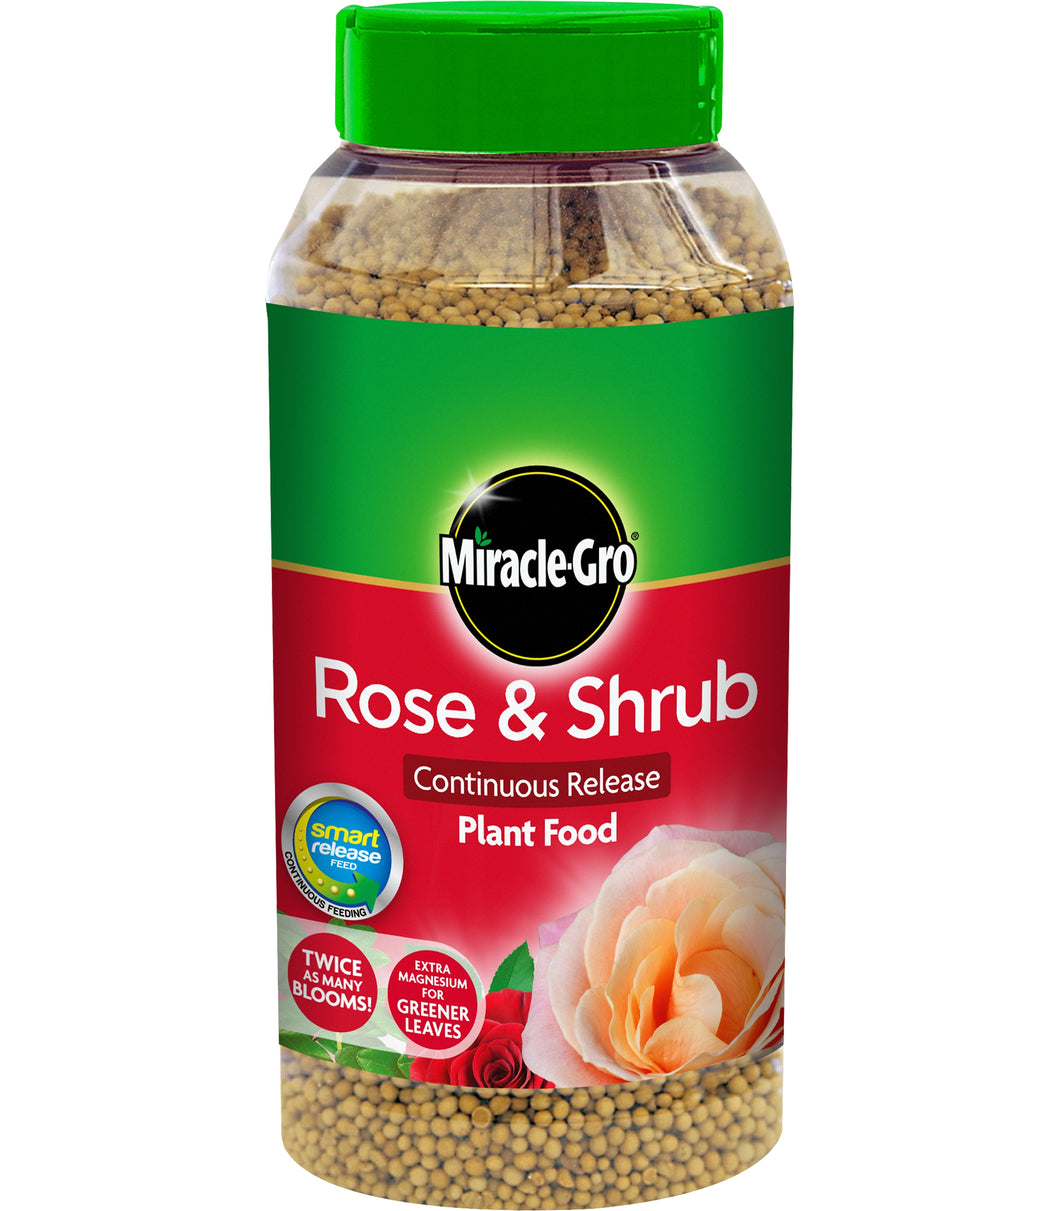 Miracle gro slow release Rose & shrub 900g